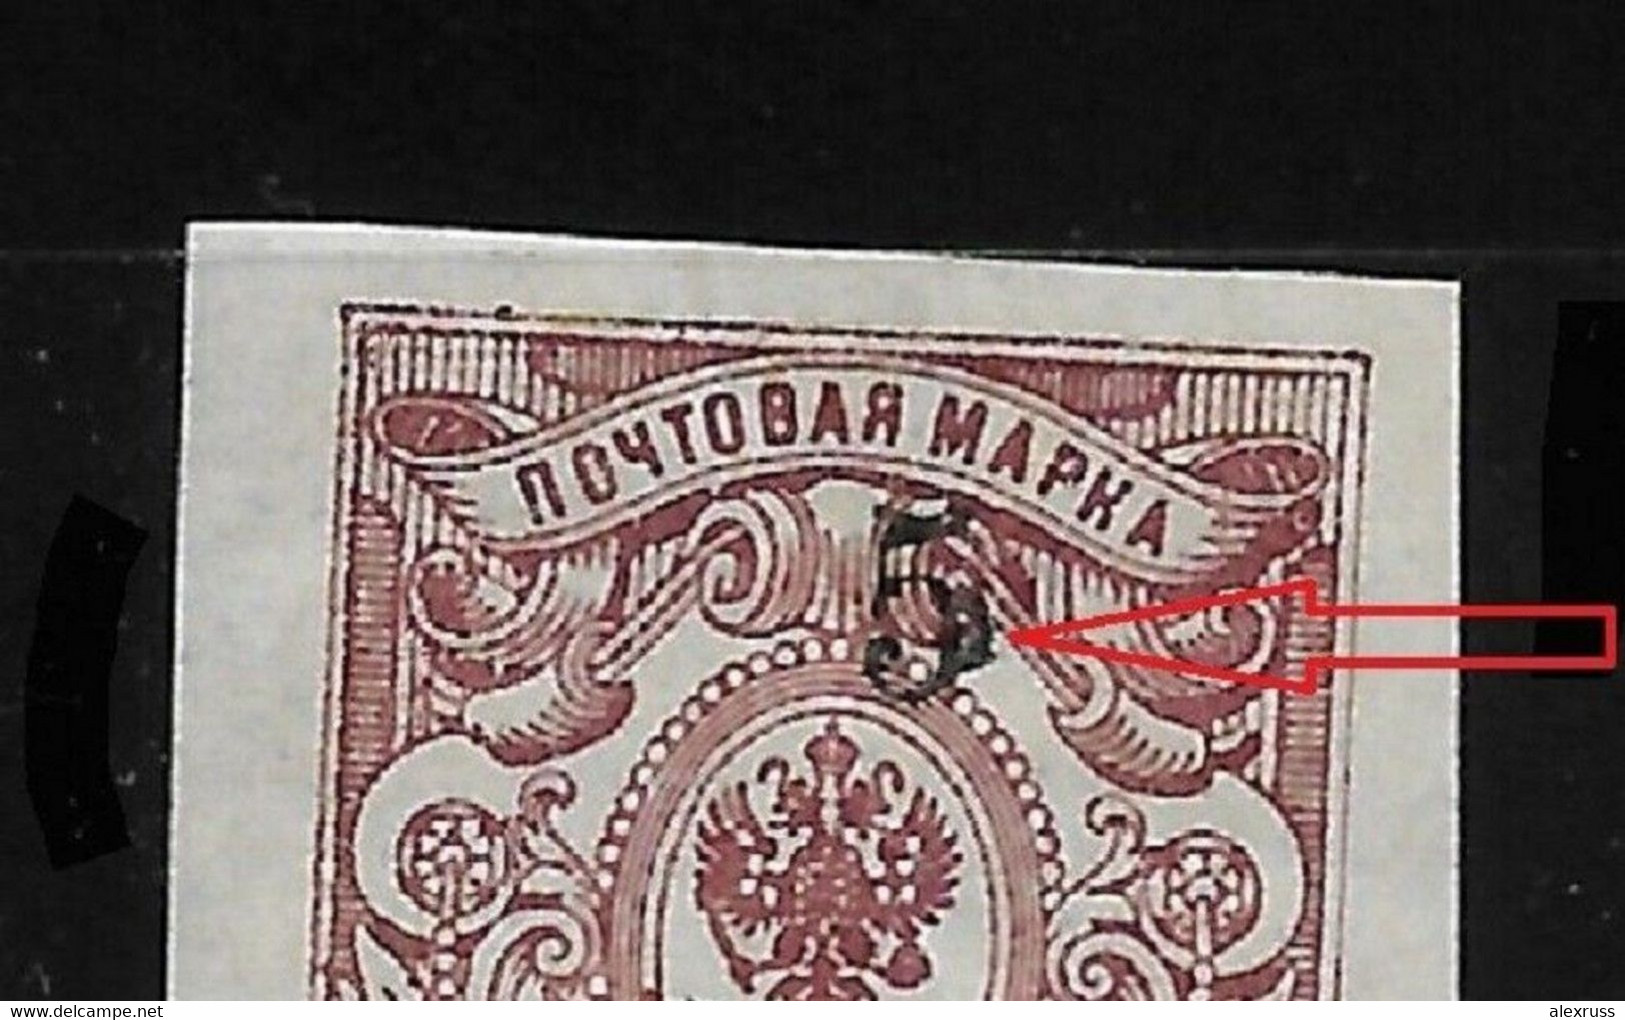 Russia 1920, Wrangel South Russia 5 Rub Imperf. PLATE ERROR, MLH*OG (OLG-6) - South-Russia Army